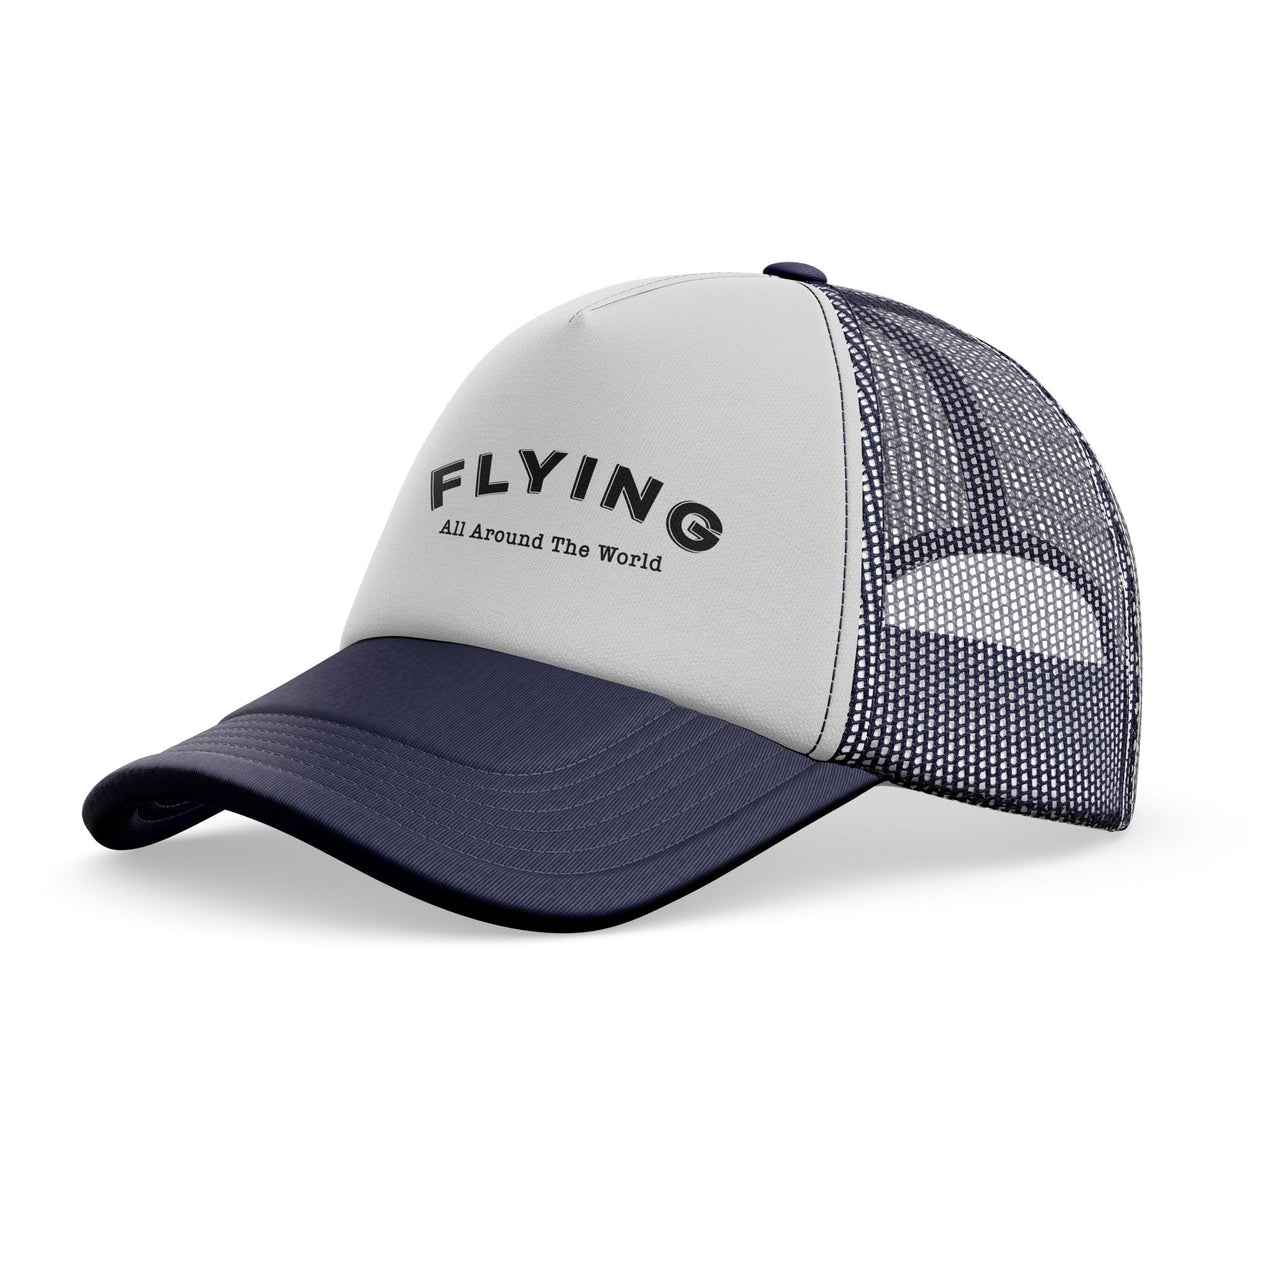 Flying All Around The World Designed Trucker Caps & Hats